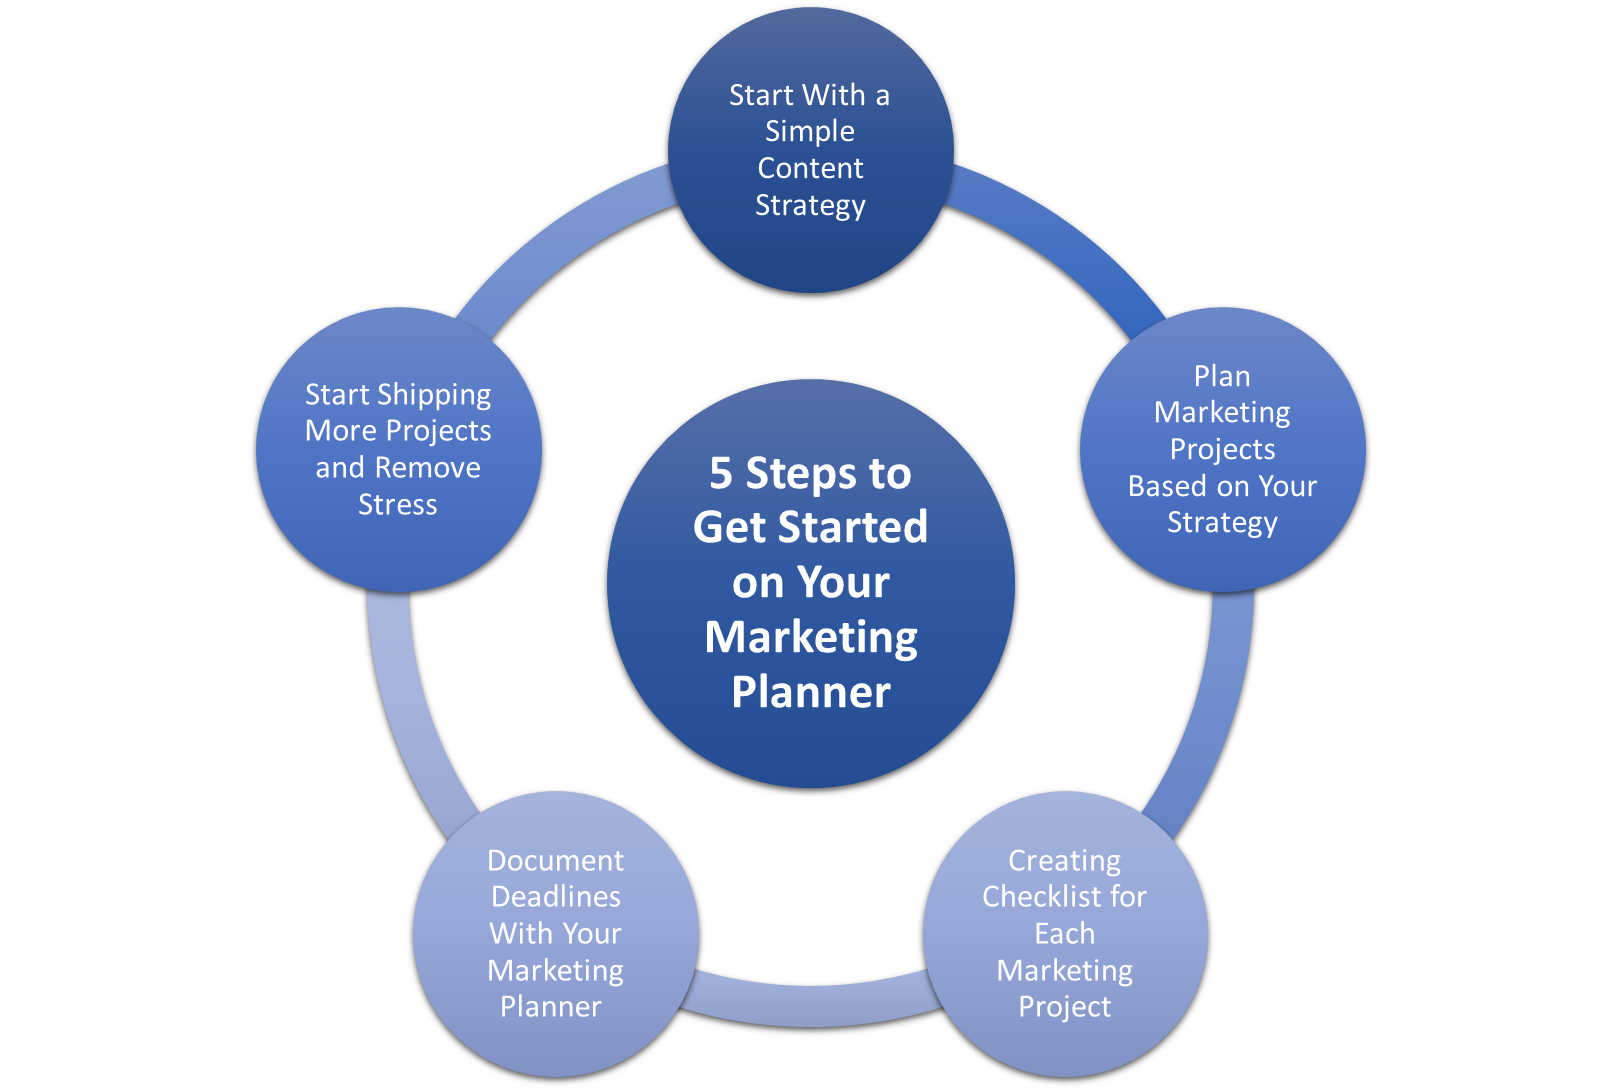 5 Steps to Get Started on Your Marketing Planner